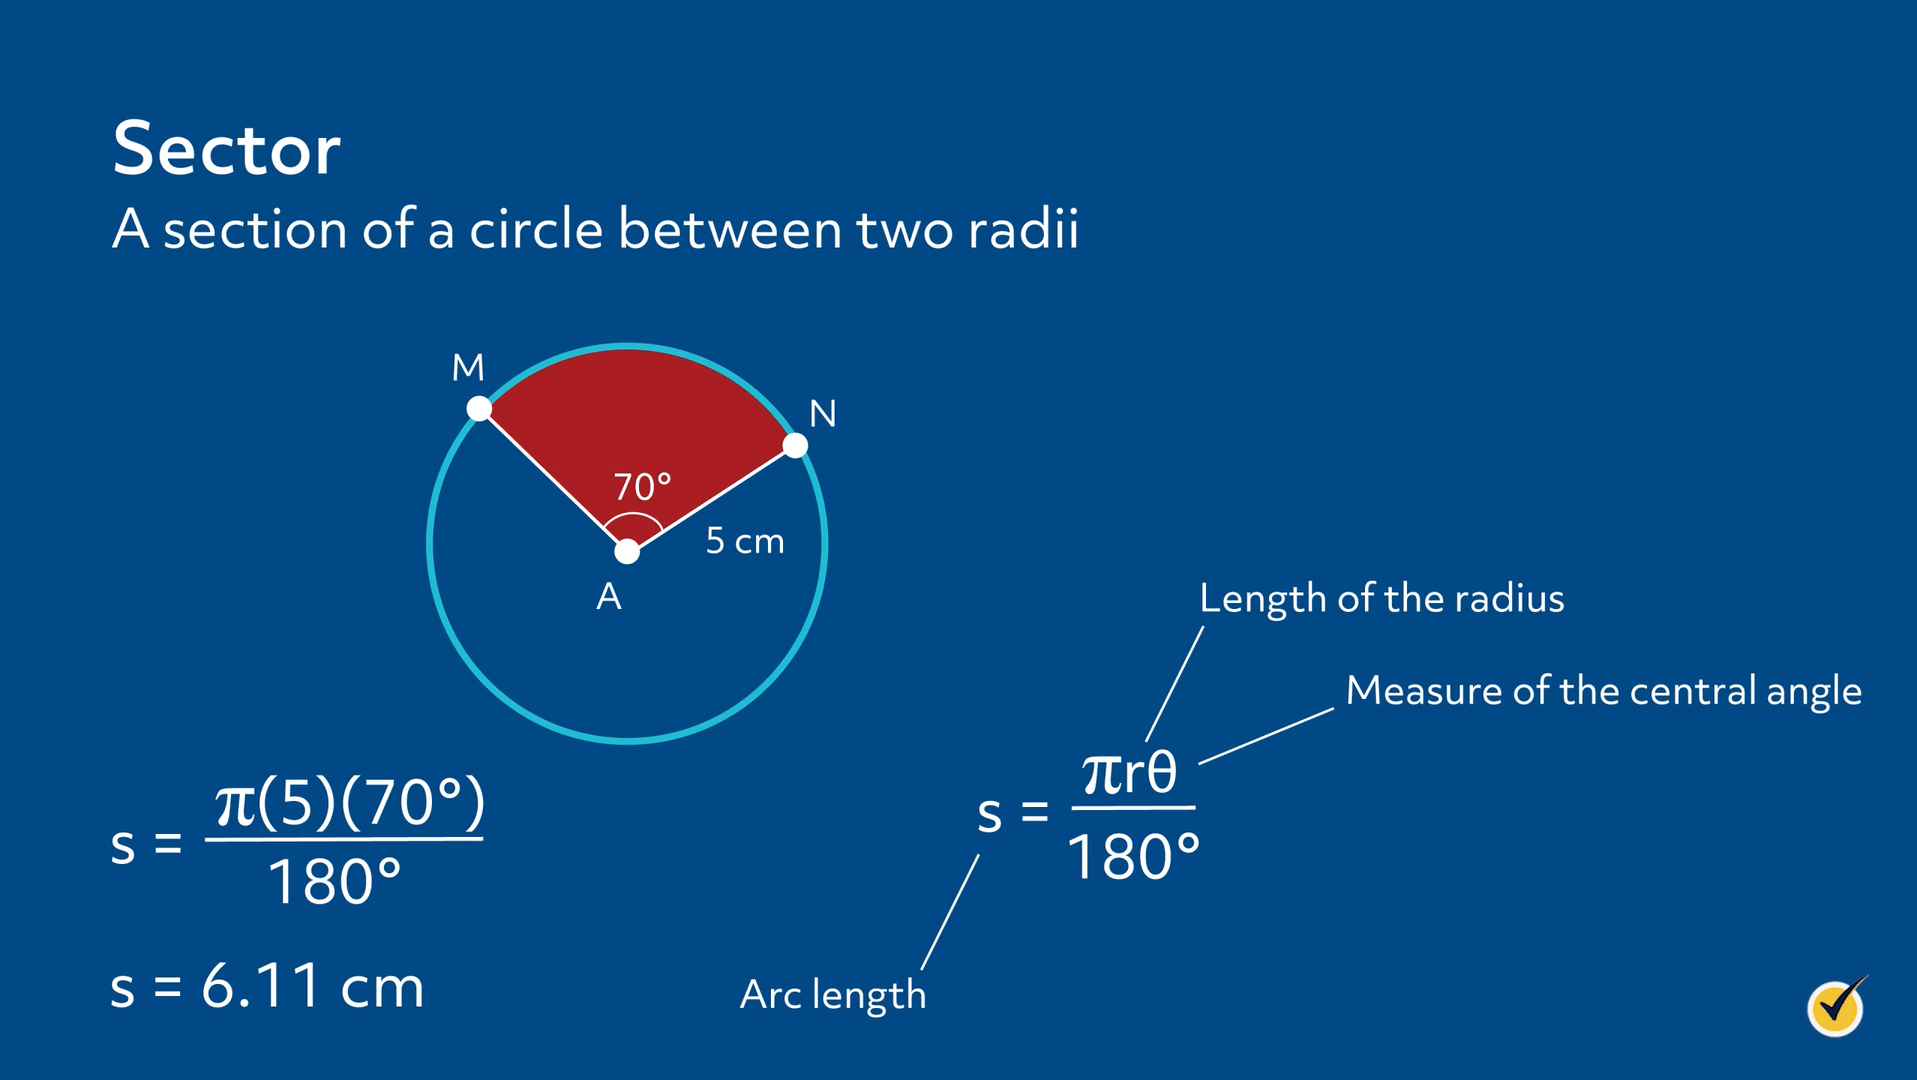 Image of a sector: a section of a circle between two radii. This sector has an arc of 70 degrees. 